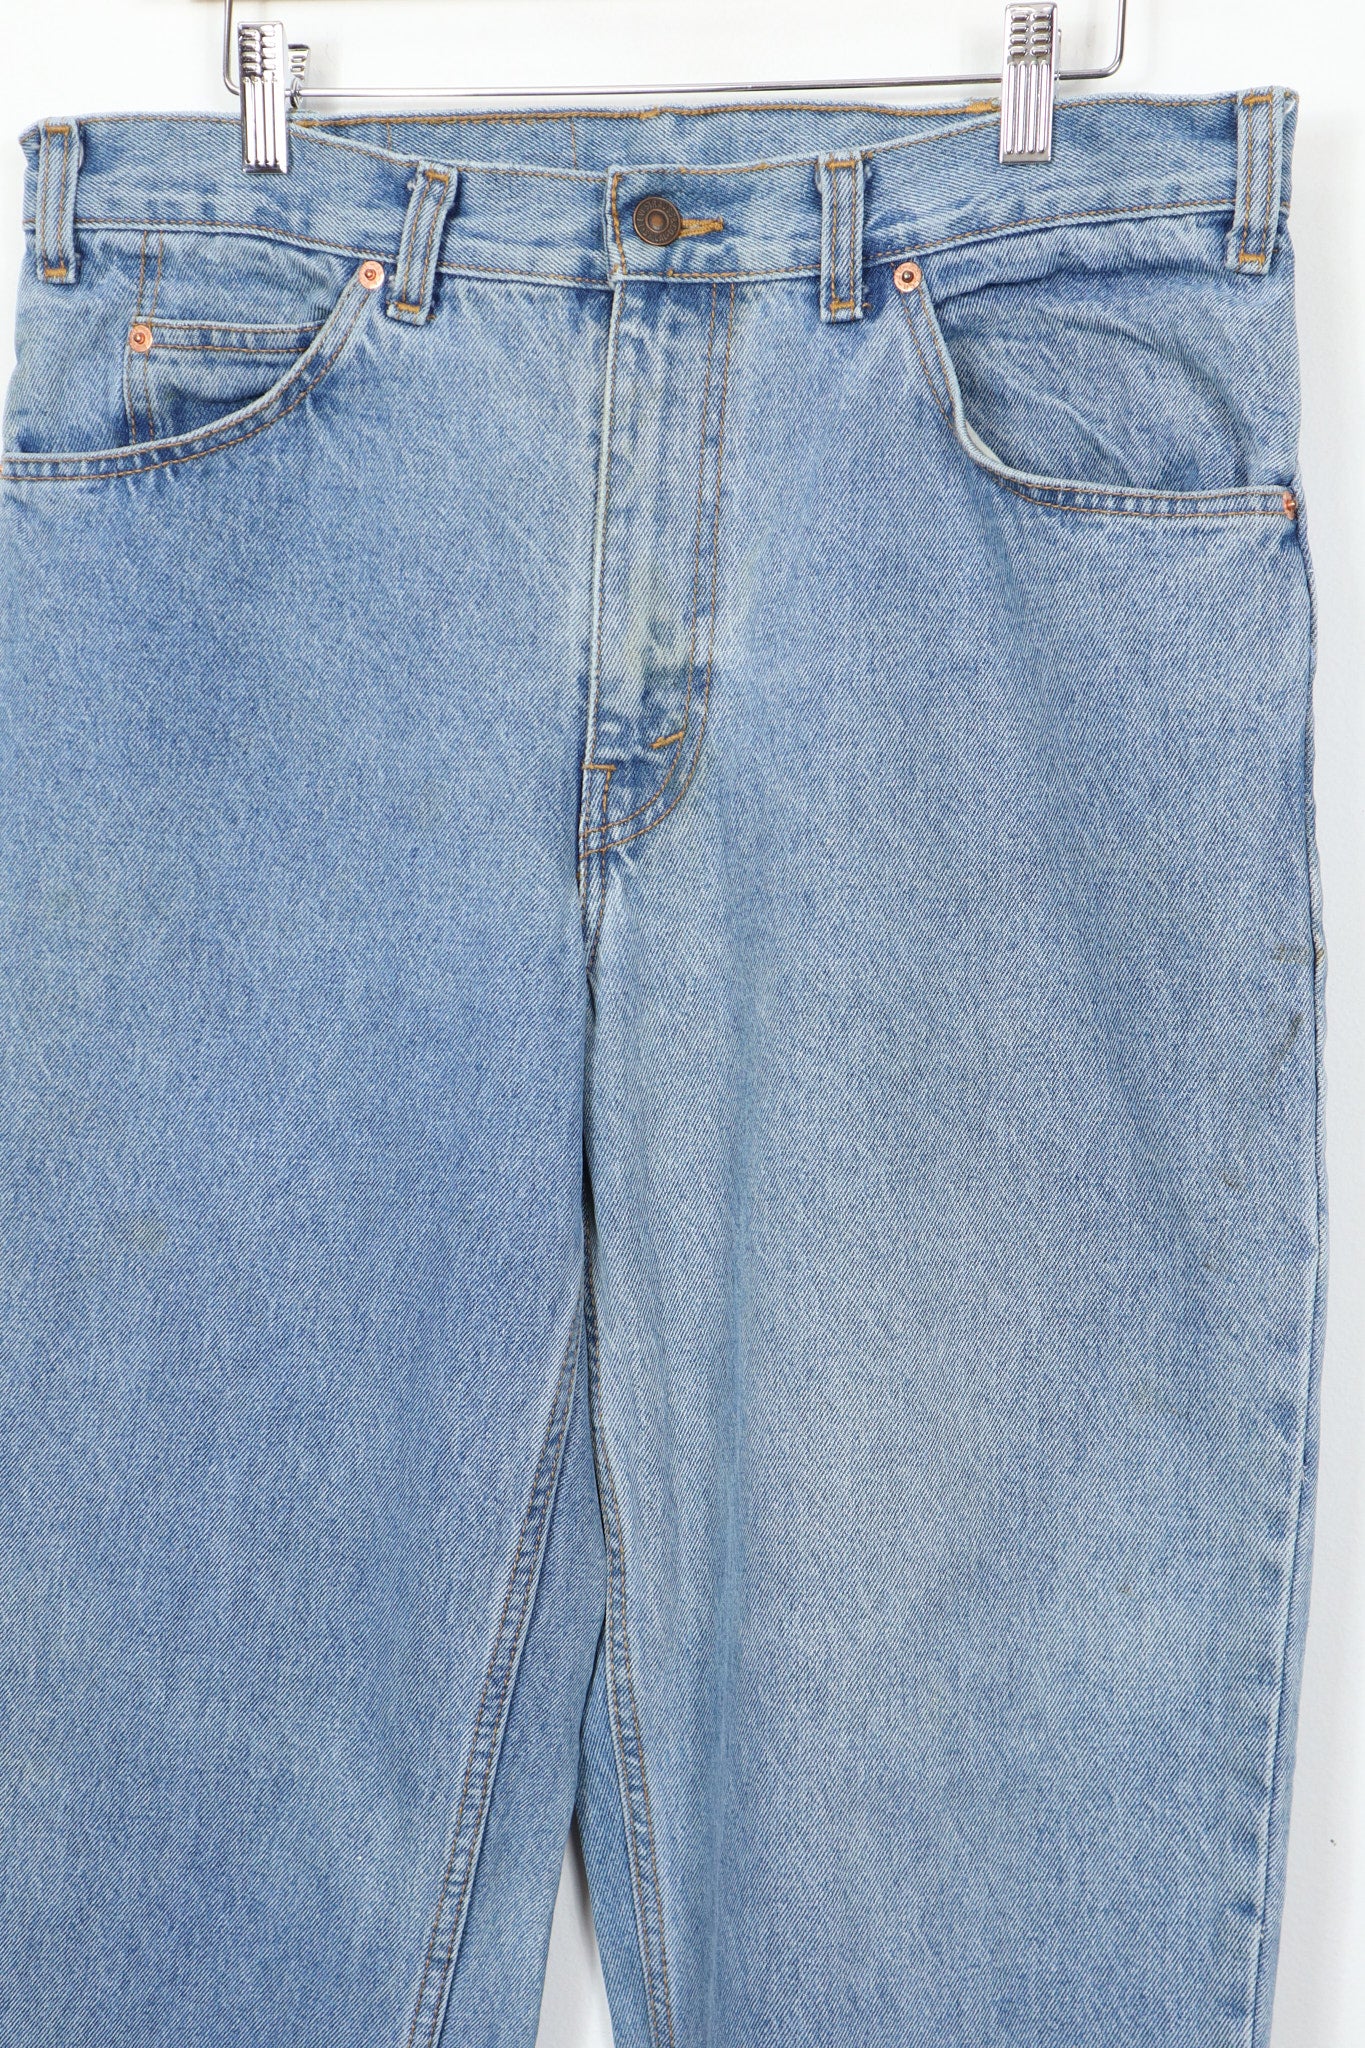 Vintage Levi's Orange Tab Relaxed Tapered Fit Jeans